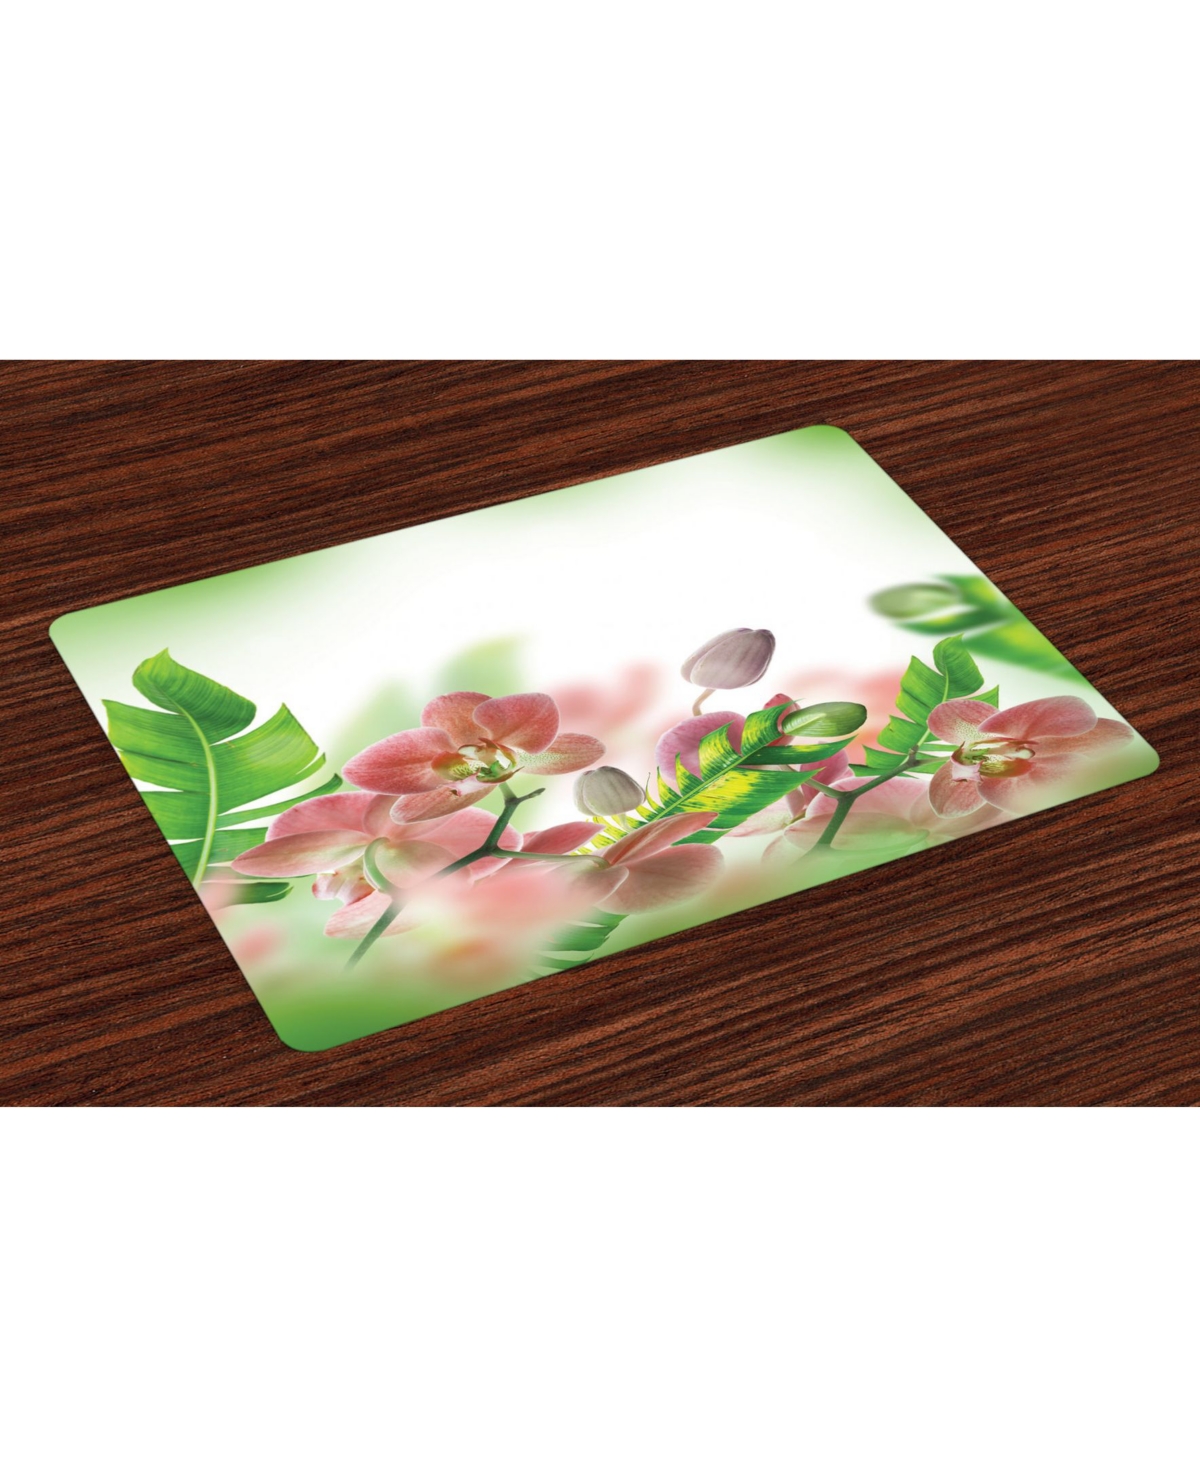 AMBESONNE TROPICAL PLACE MATS, SET OF 4